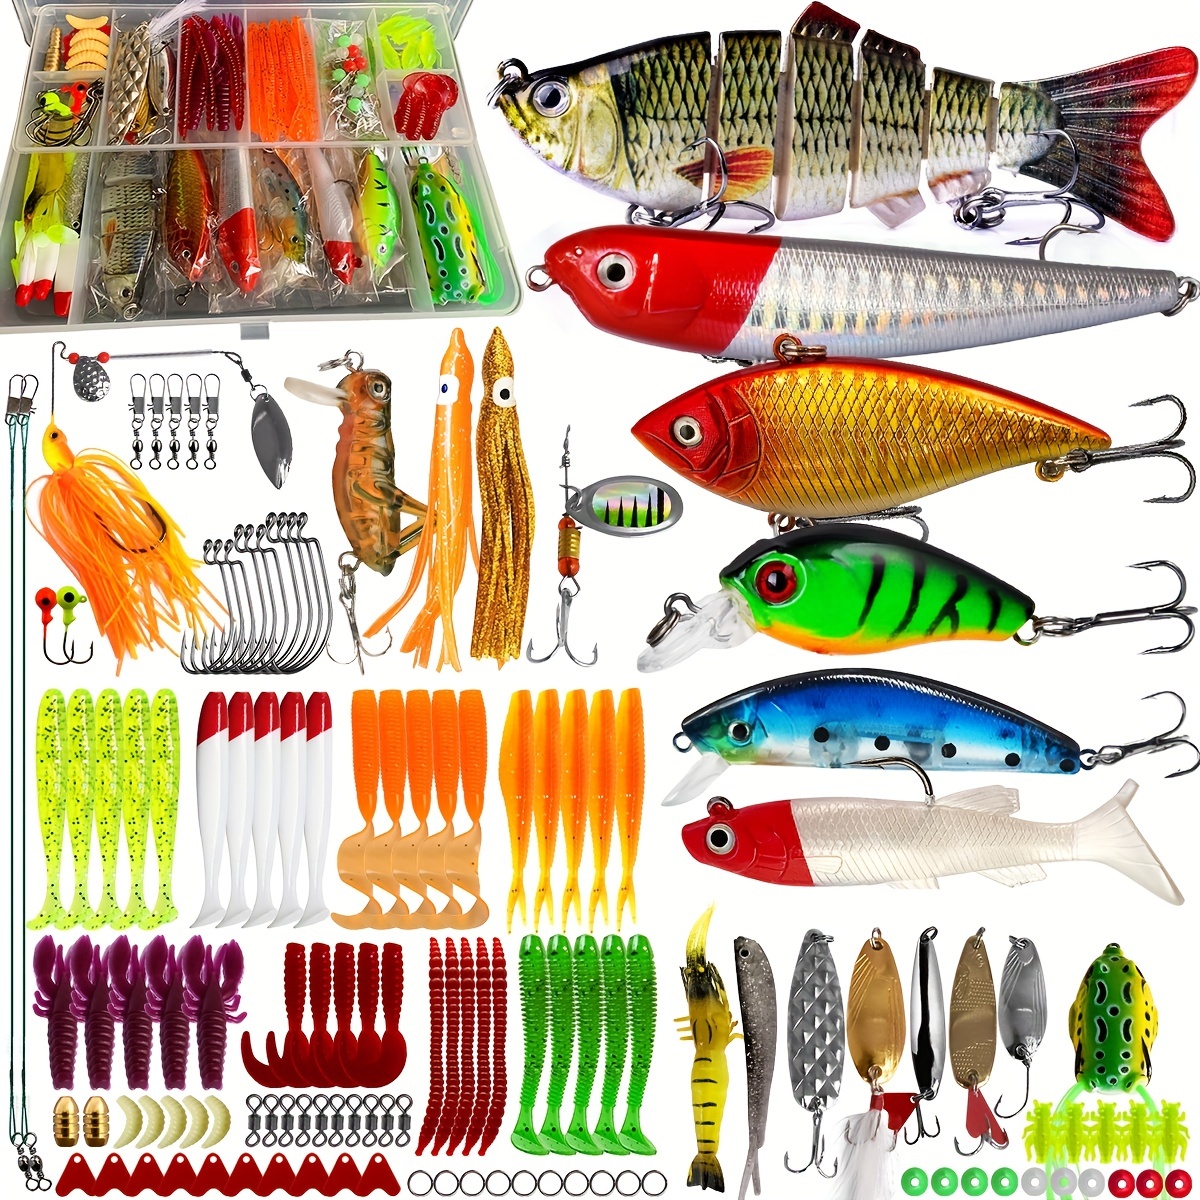 

88/108/130/360pcs Complete Fishing Tackle Kit: Crankbaits, Spinnerbaits, Plastic Worms, Jigs, Topwater Lures For Trout, Bass & Salmon